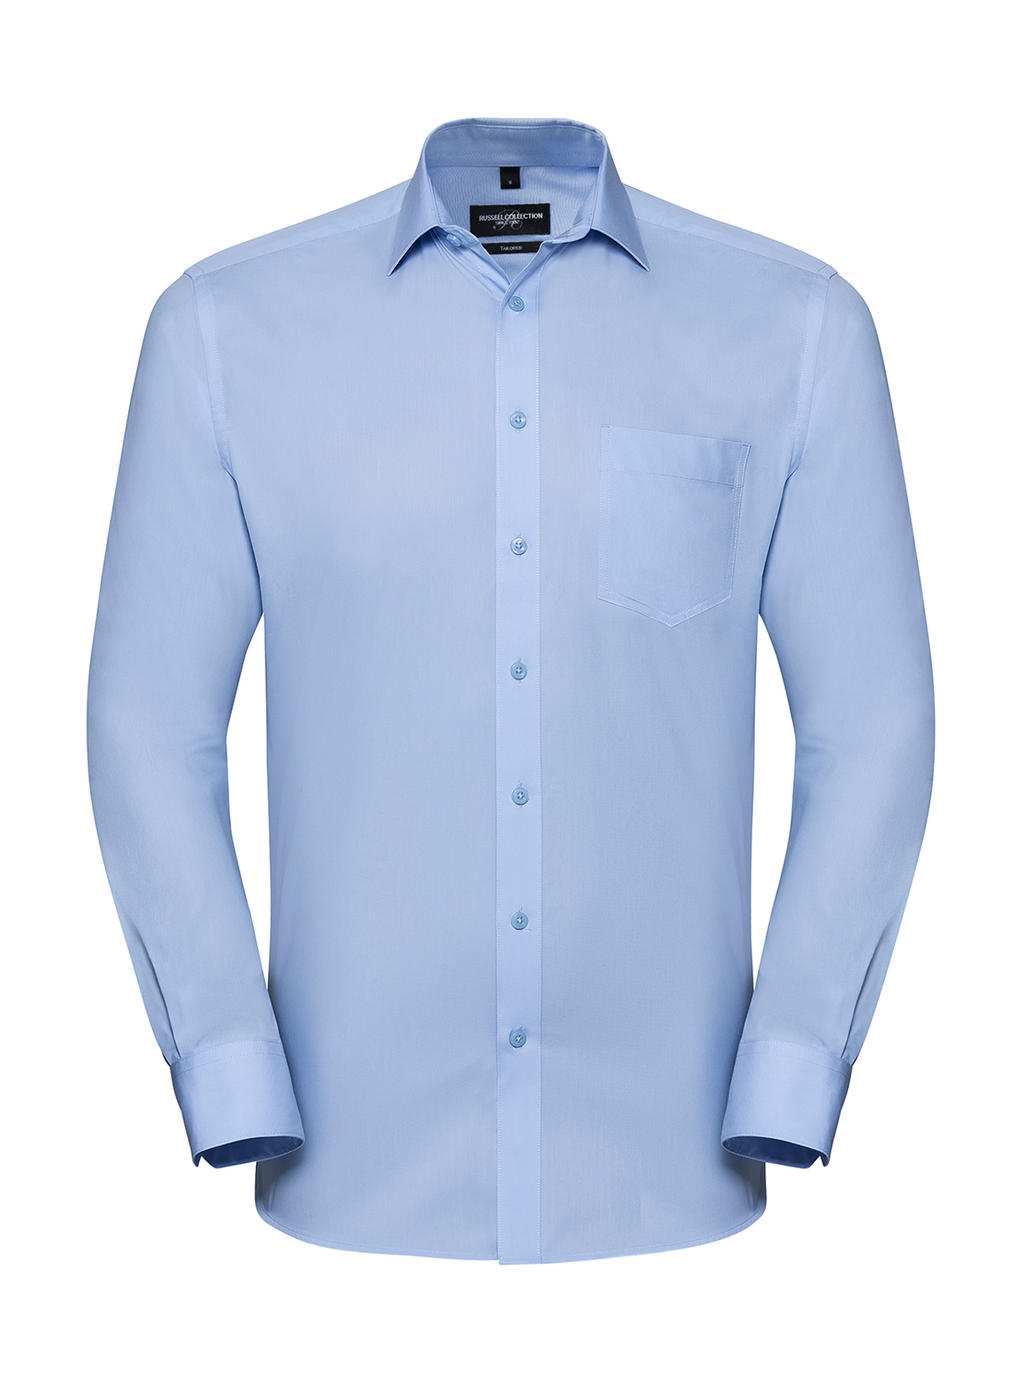  Mens LS Tailored Coolmax? Shirt in Farbe Light Blue